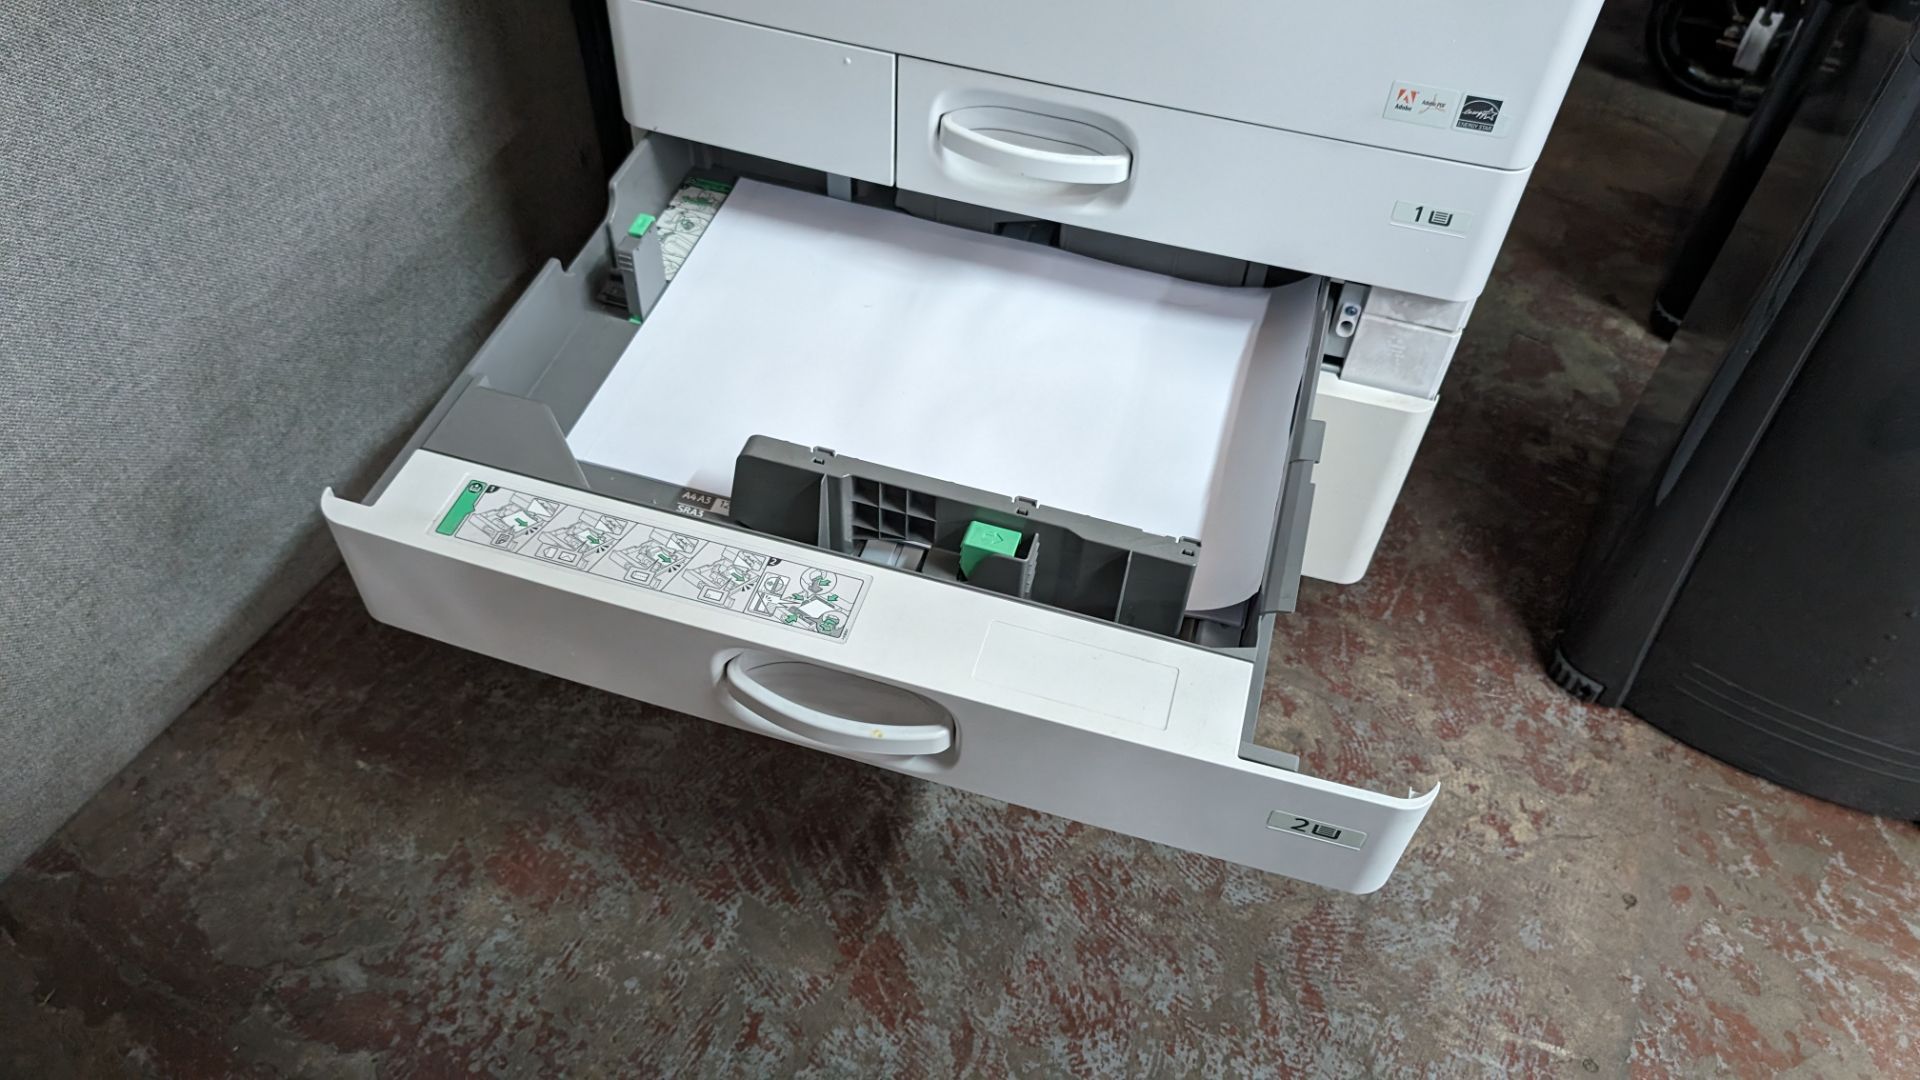 Ricoh MP C3003 floor standing copier with touchscreen controls, ADF, twin paper cassettes & more - Image 11 of 18